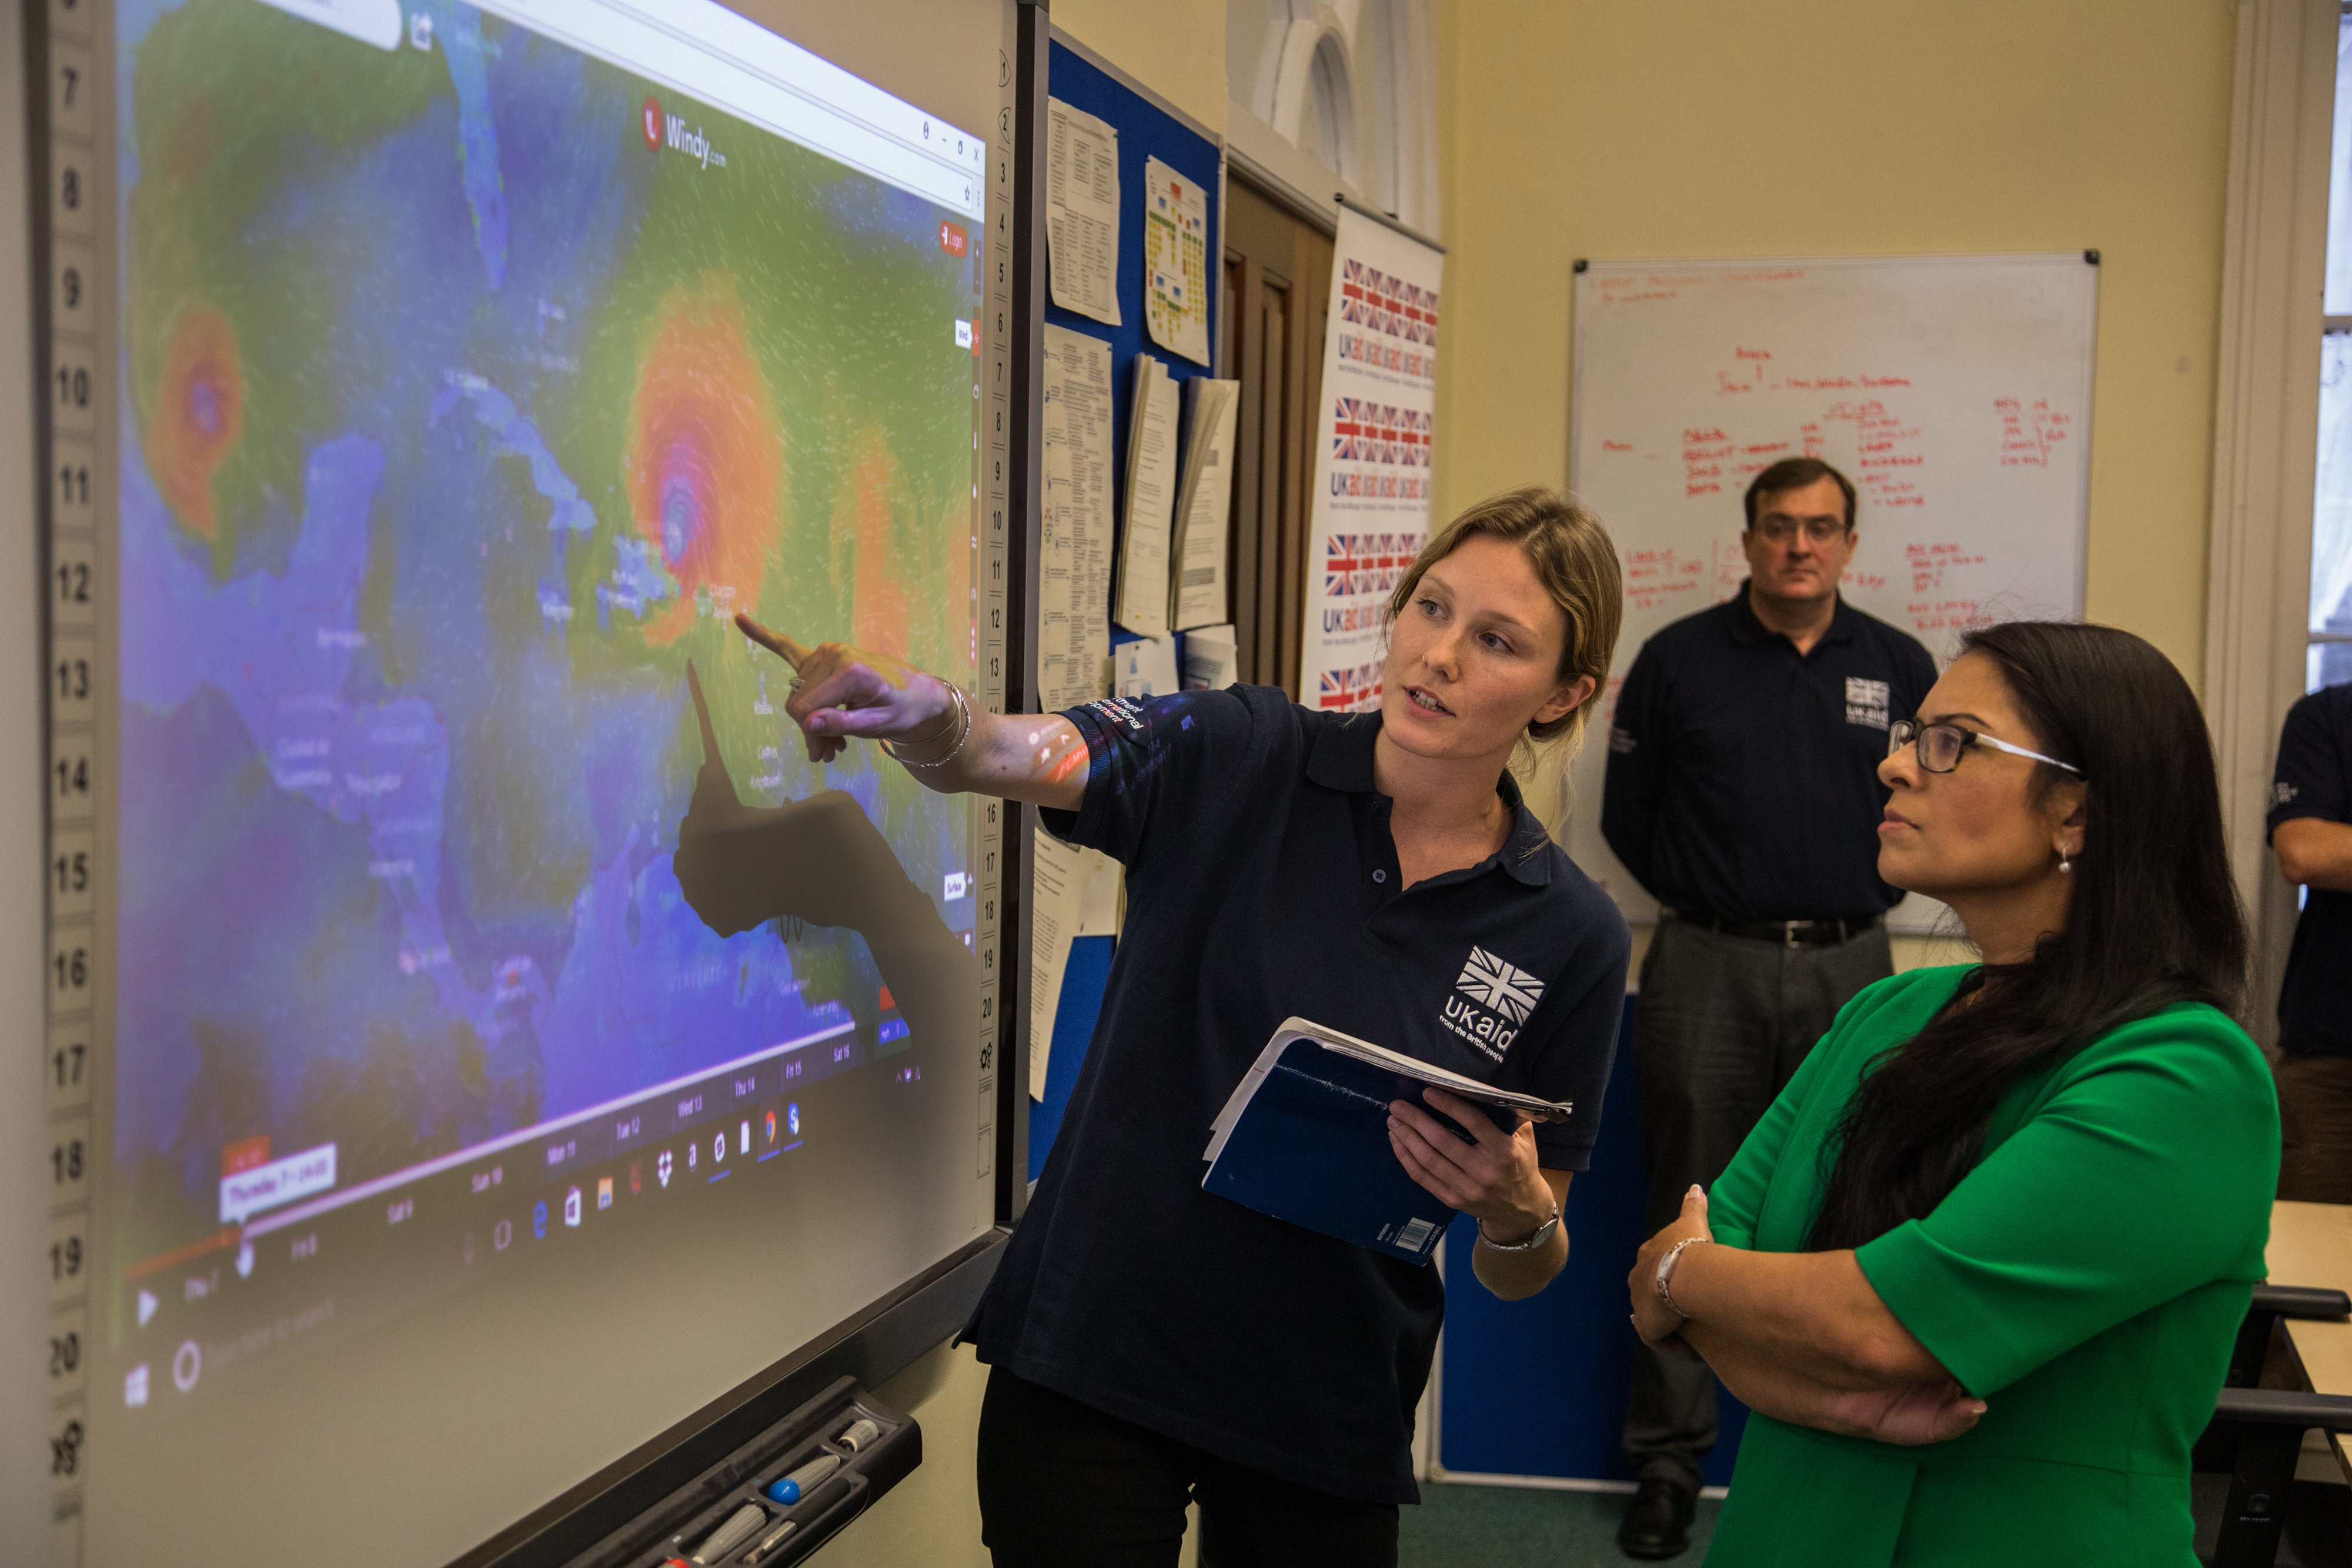 Priti Patel in the DFID UK aid Hurricane Irma Crisis Operations Room, as staff coordinate relief and supplies for those affected. Picture: Michael Hughes/DFID (CC BY 2.0)